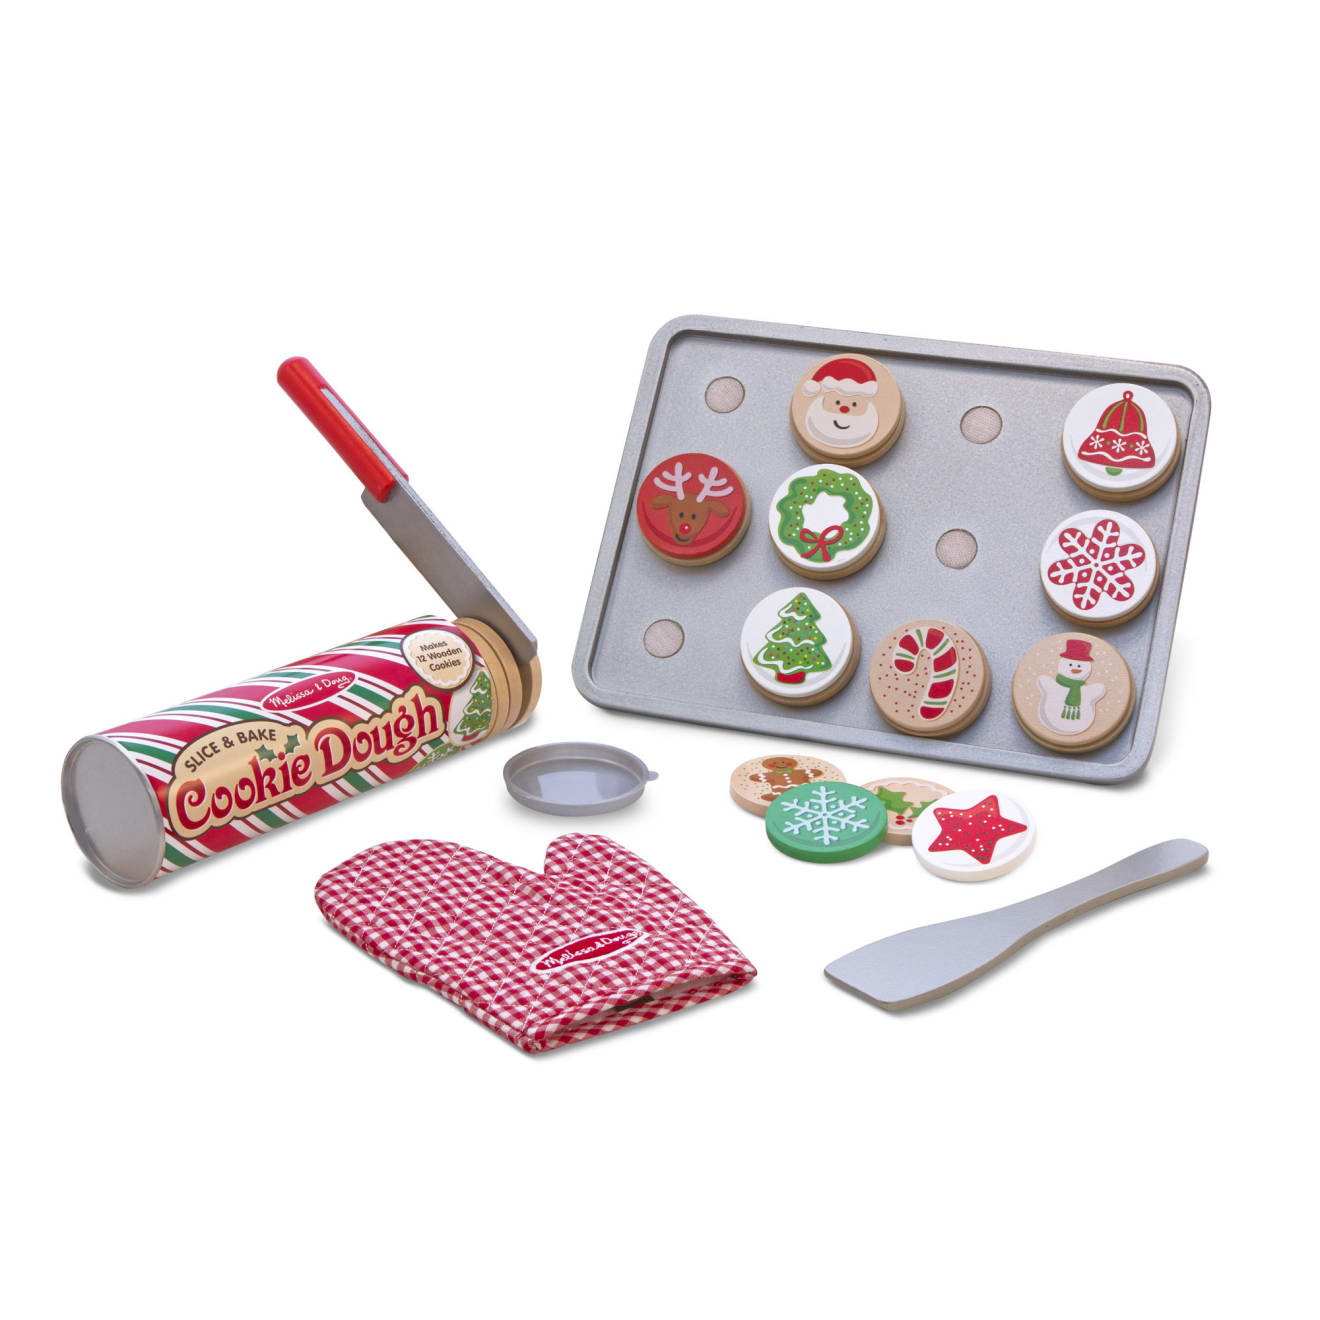 https://cdn.shopify.com/s/files/1/0550/8487/5830/products/Slice-Bake-Christmas-Cookie-Play-Set-005158-1-Pieces-Out.jpg?v=1664908261